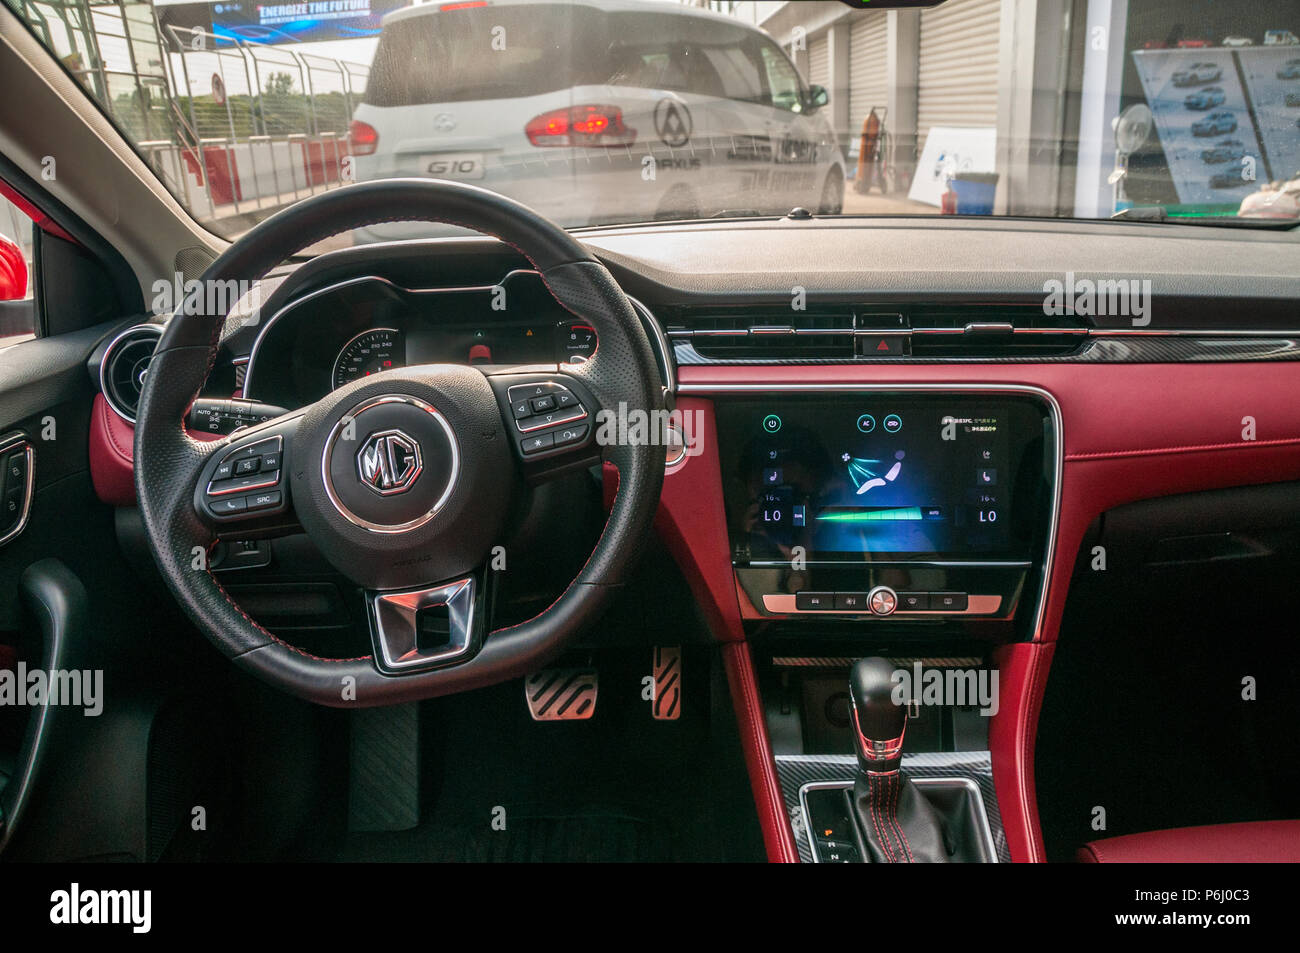 Dashboard of the new MG 6 car from SAIC. Stock Photo